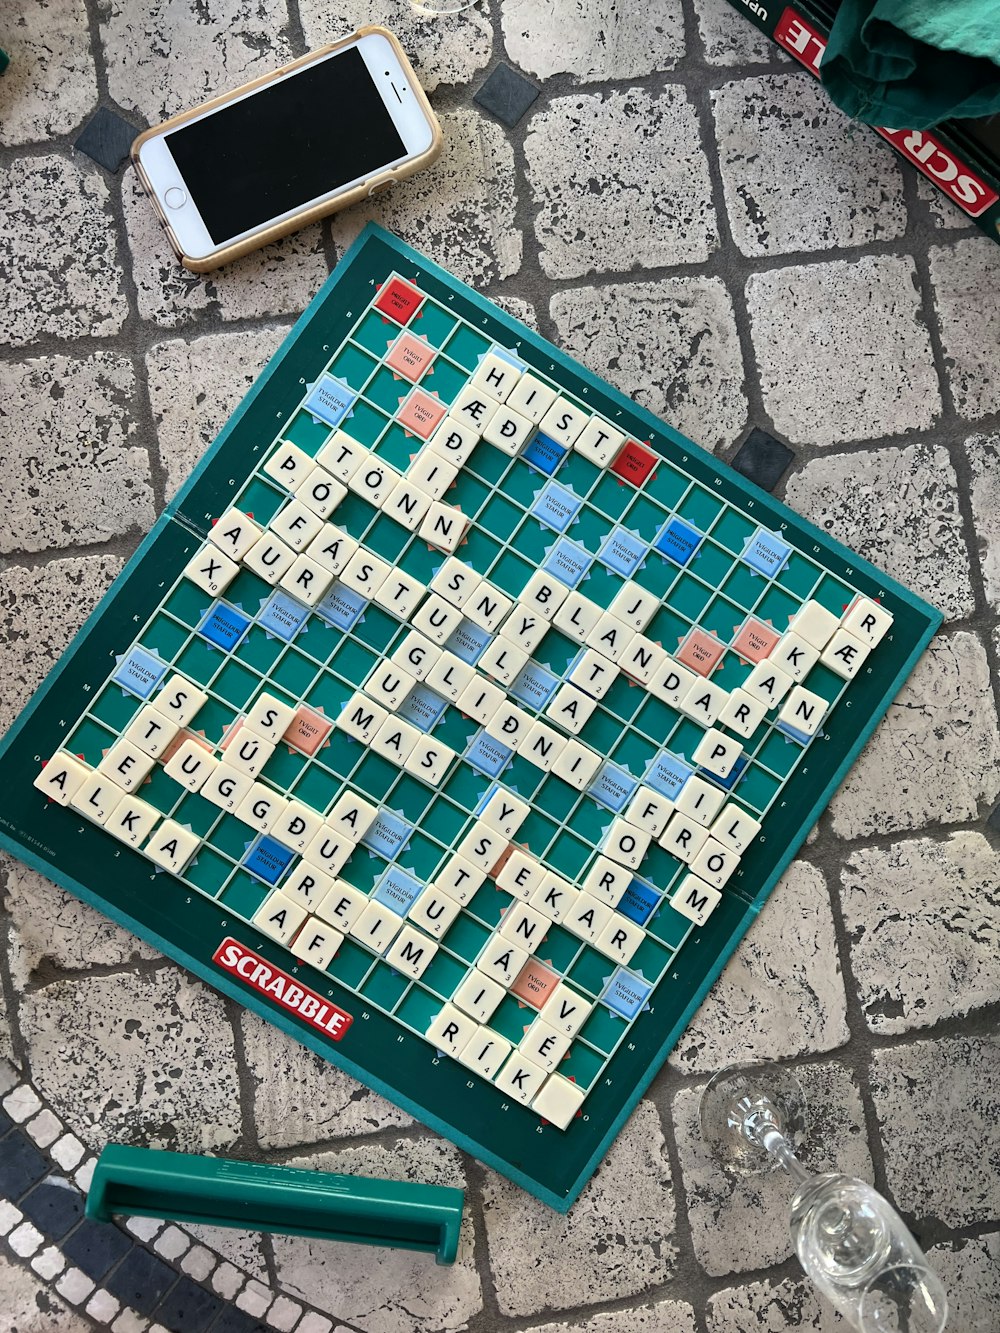 a scrabble board sitting on the ground next to a cell phone